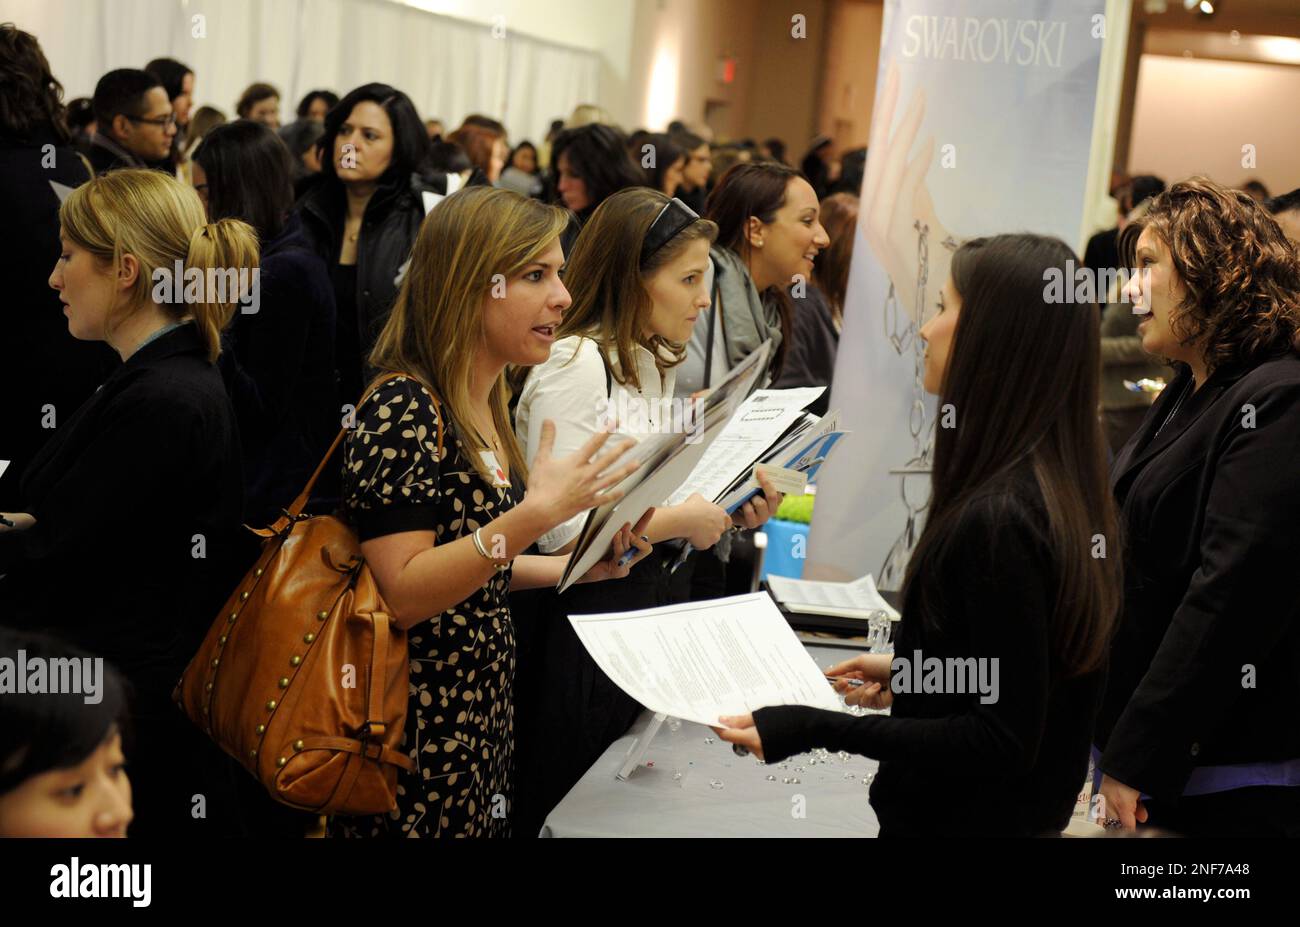 Alison Ungerleider, center, meets with a representative from Swarovski at  the WWD Fashion Career Expo, Friday, Feb. 20, 2009, in New York. People  looking for jobs in the fashion industry met with